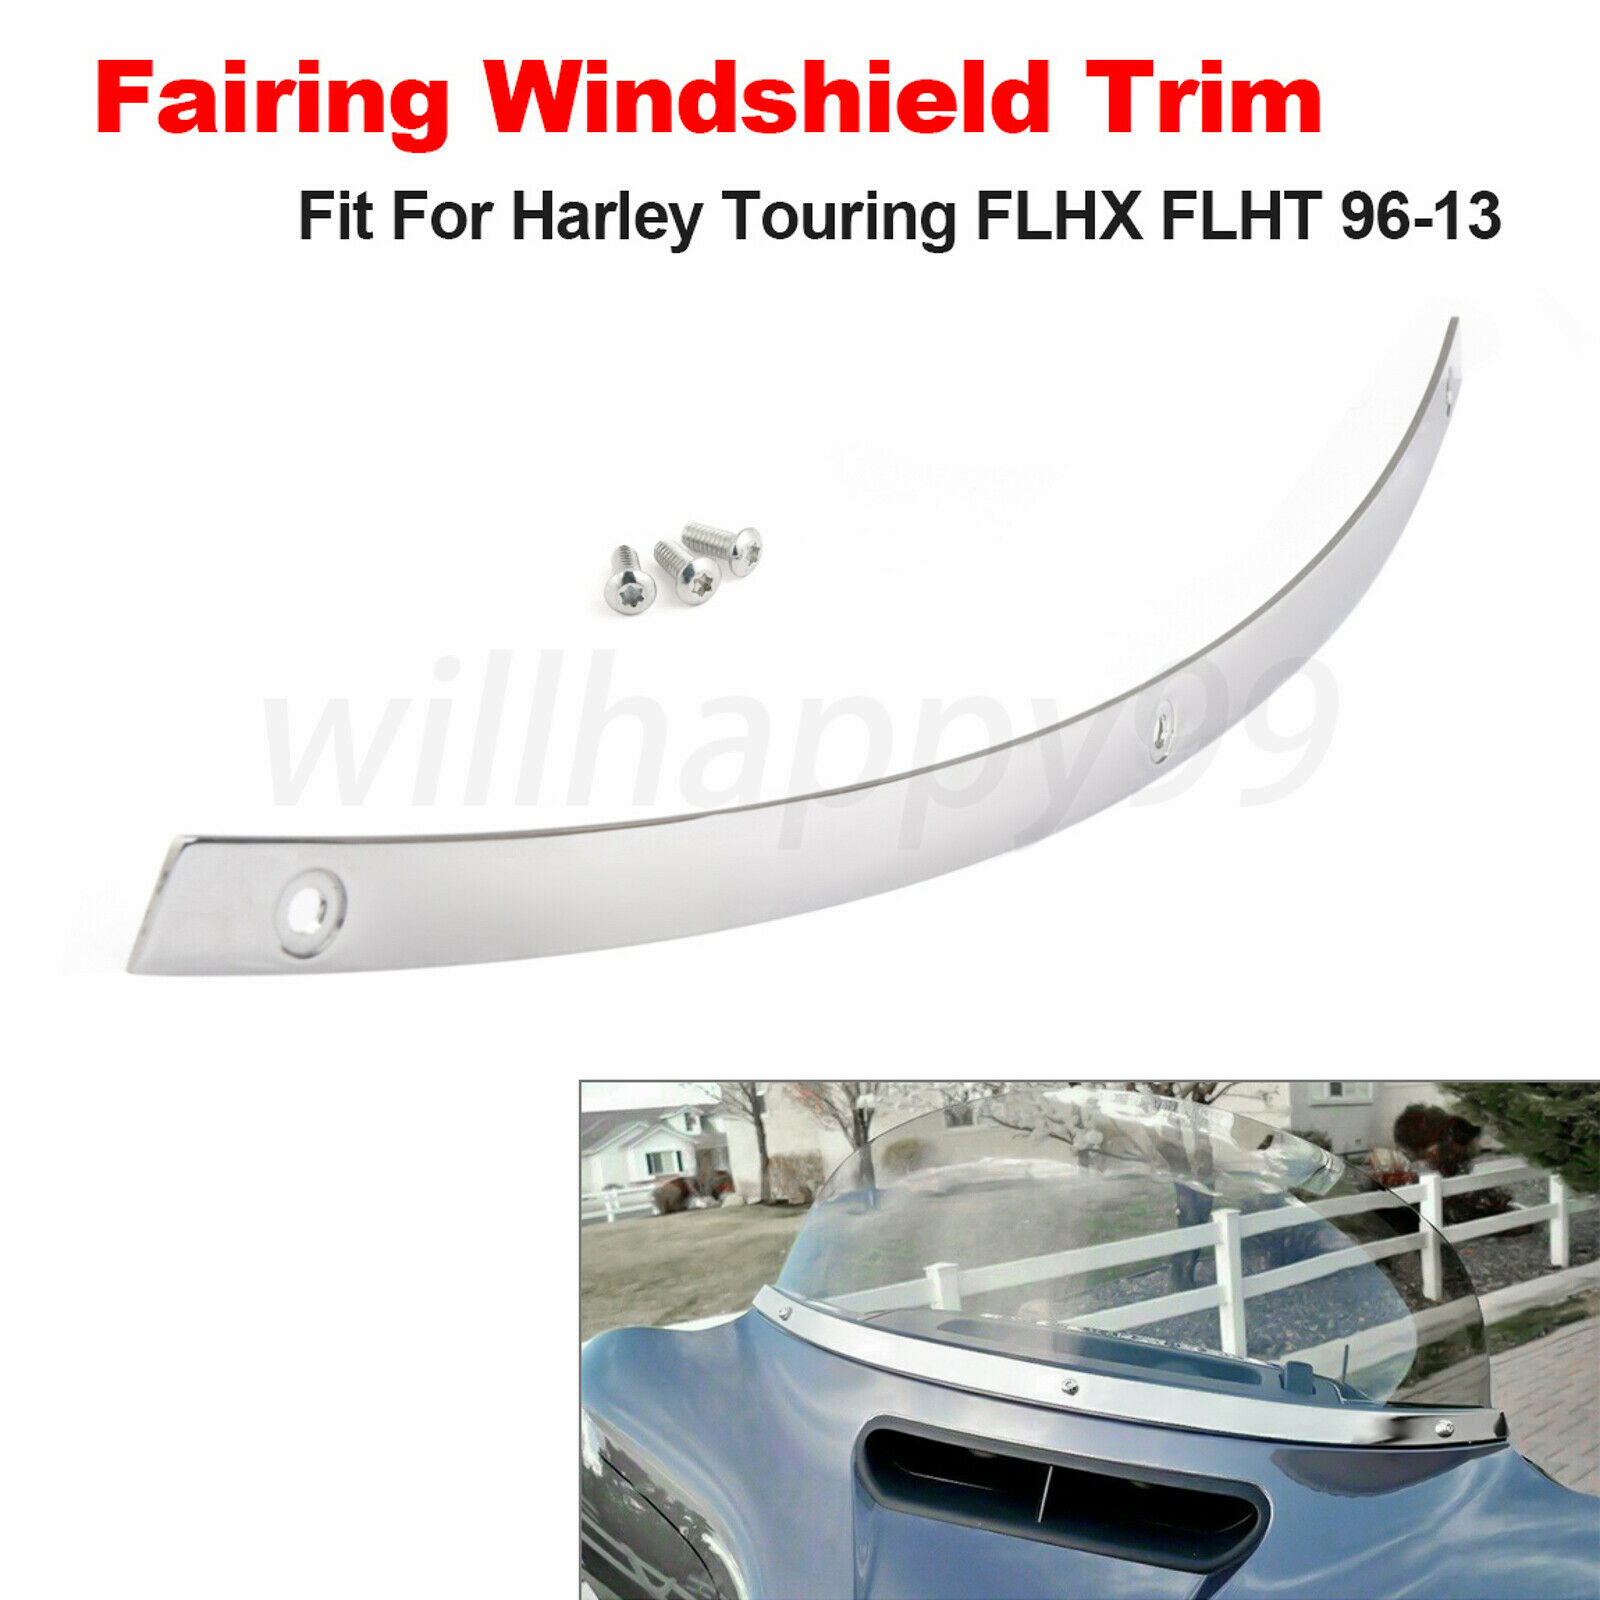 Fairing Windshield Trim Fit For Harley Touring Electra Ultra Classic 1996-2013